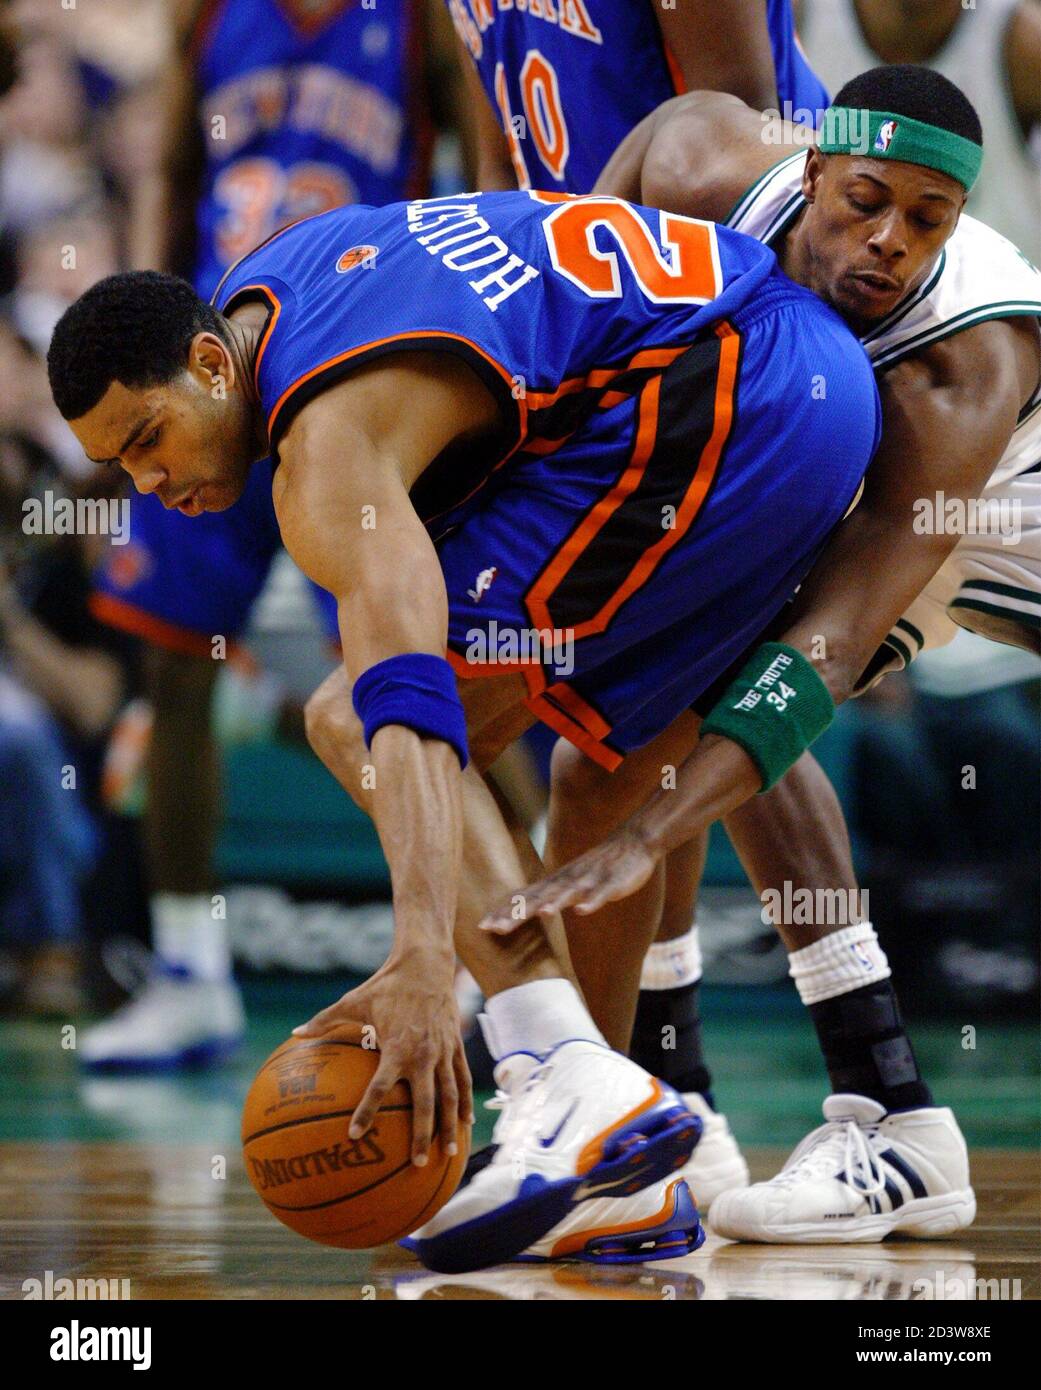 The Boston Celtics' Paul Pierce (R) reaches around the New York Knicks'  Allan Houston to knock the ball away in first quarter NBA action in Boston,  Massachusetts March 5, 2003. REUTERS/Brian Snyder